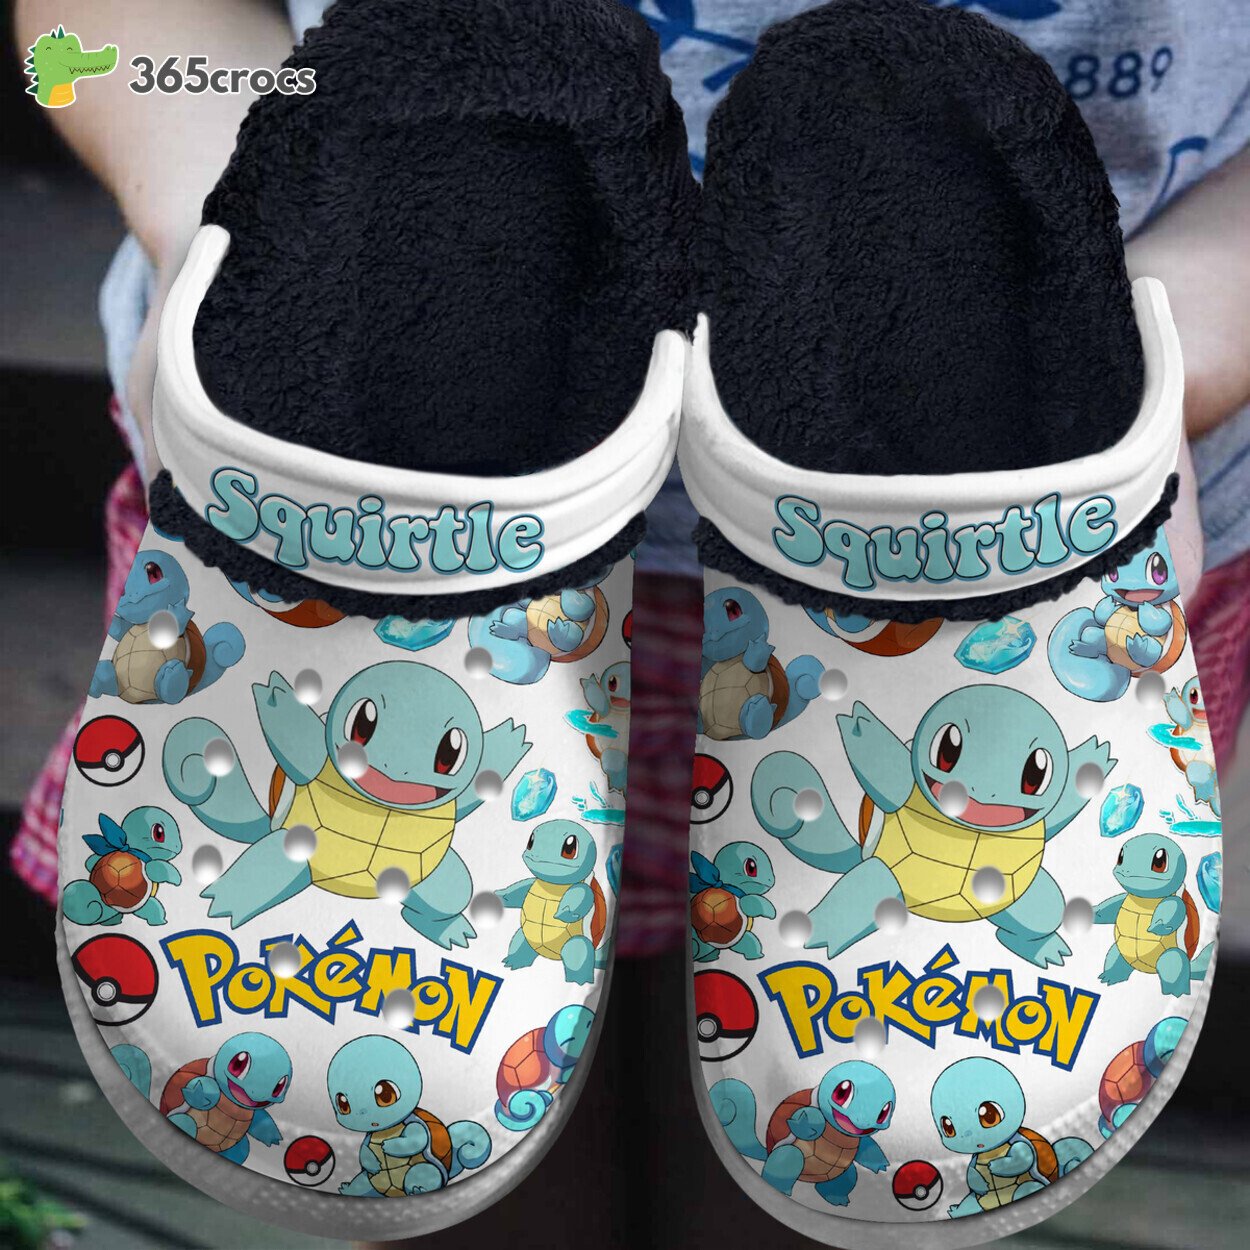 Squirtle Pokemon Anime Design Comfortable Lined Crocss Adventure On Feet